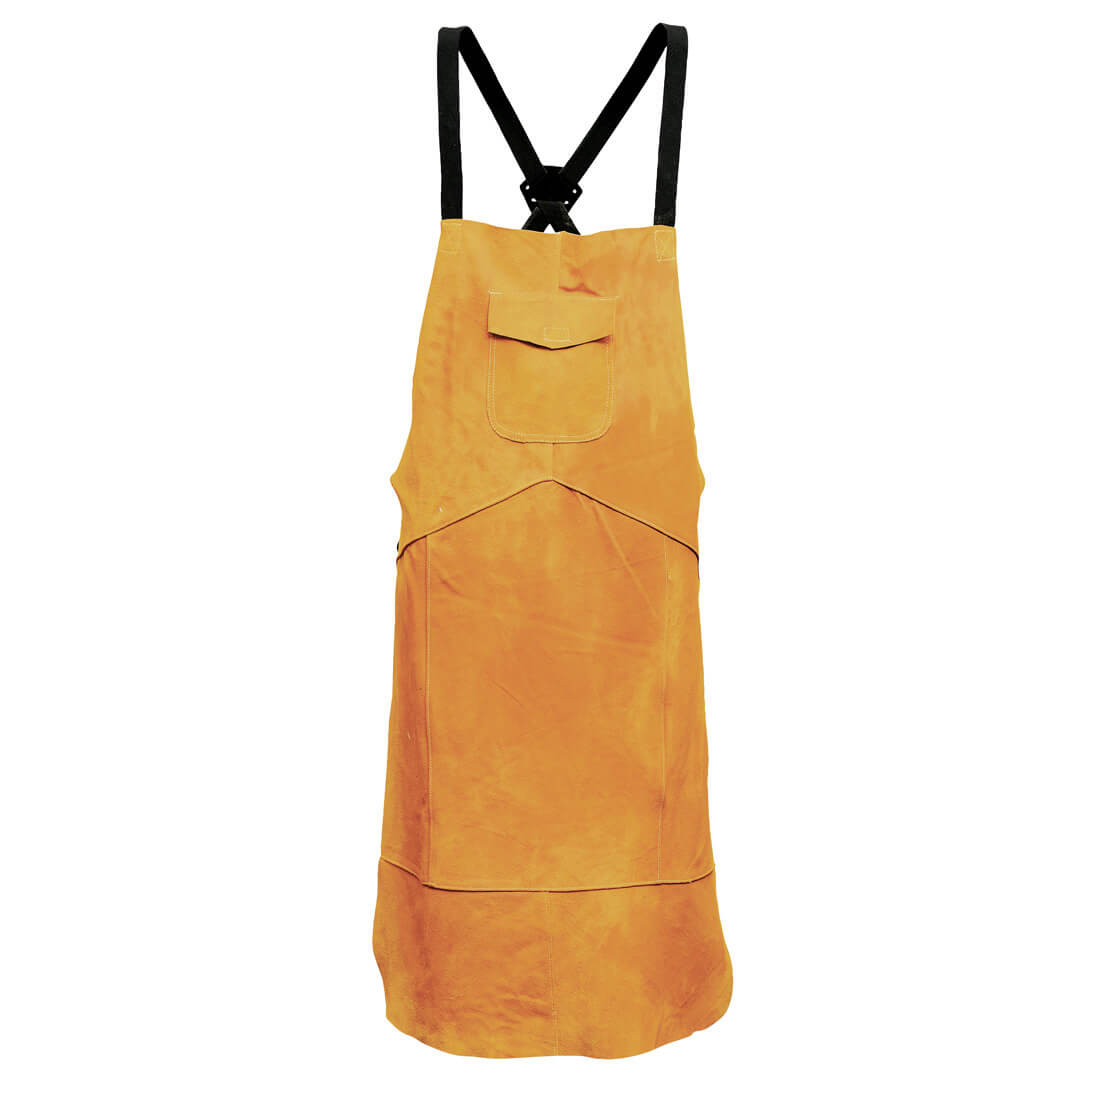 Leather Welding Apron - Personal protection